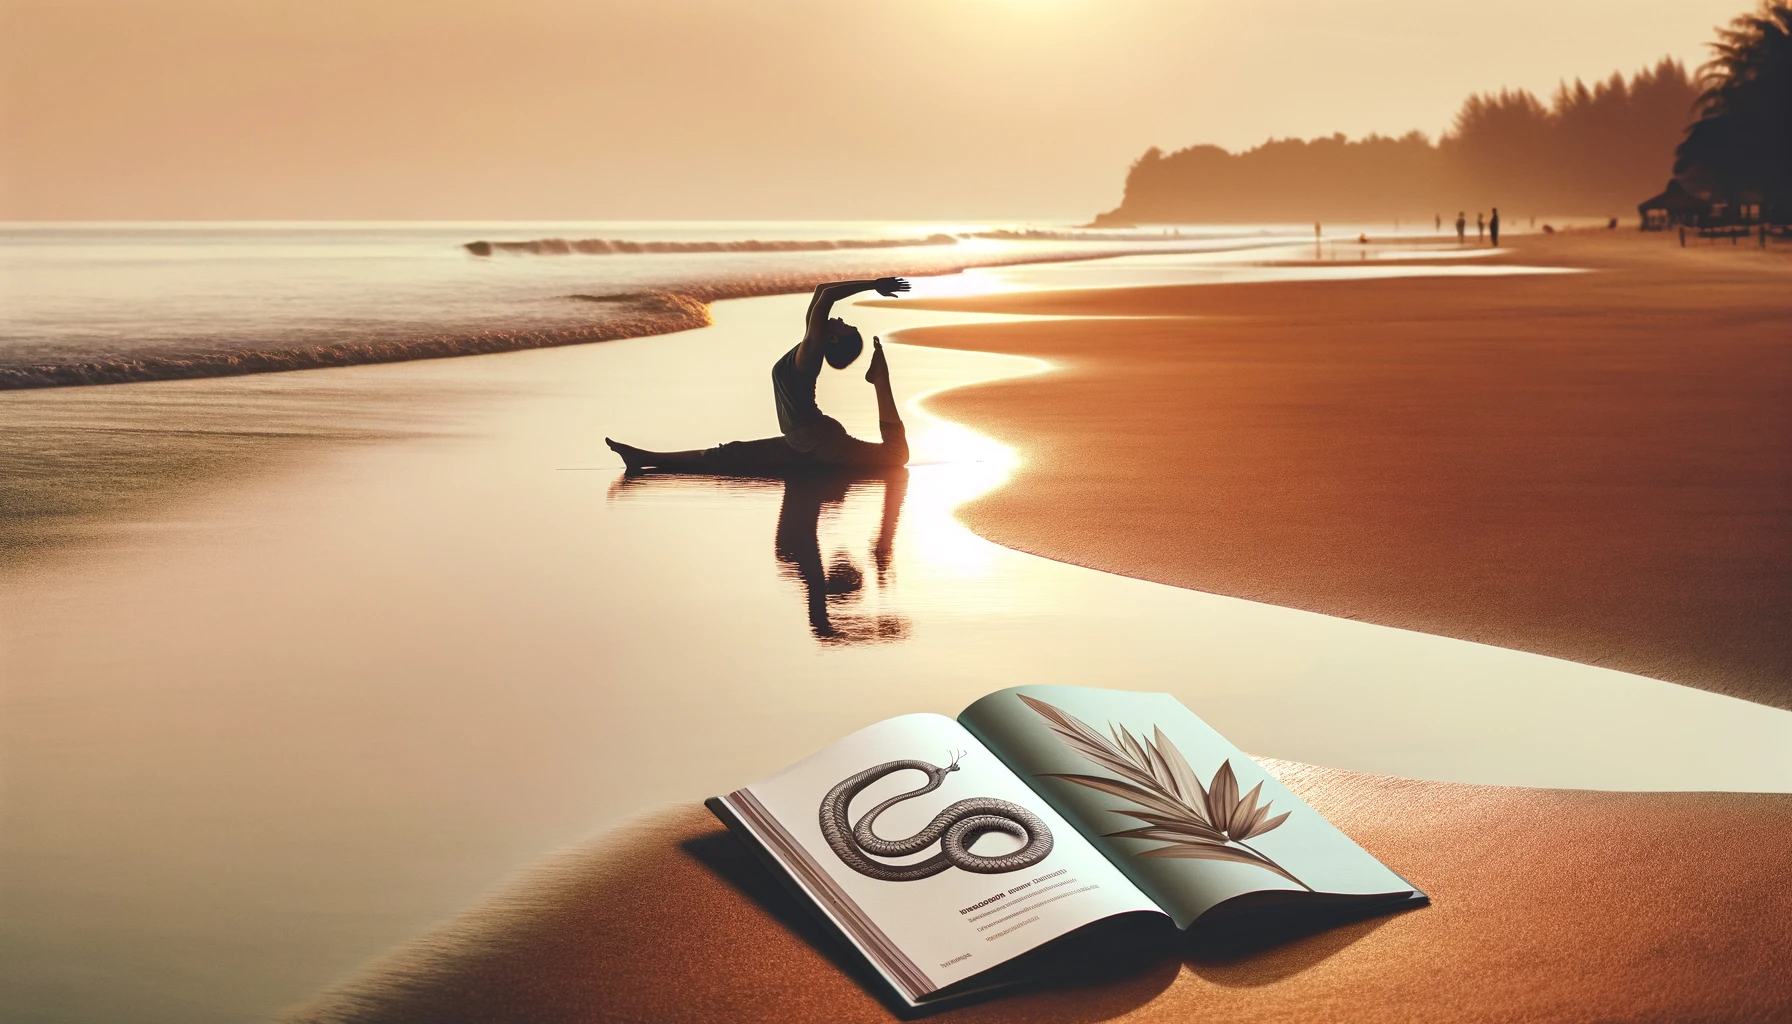 a woman performing a perfect baby cobra stretch on a calm beach during golden hour, with a step-by-step guidebook placed in the corner